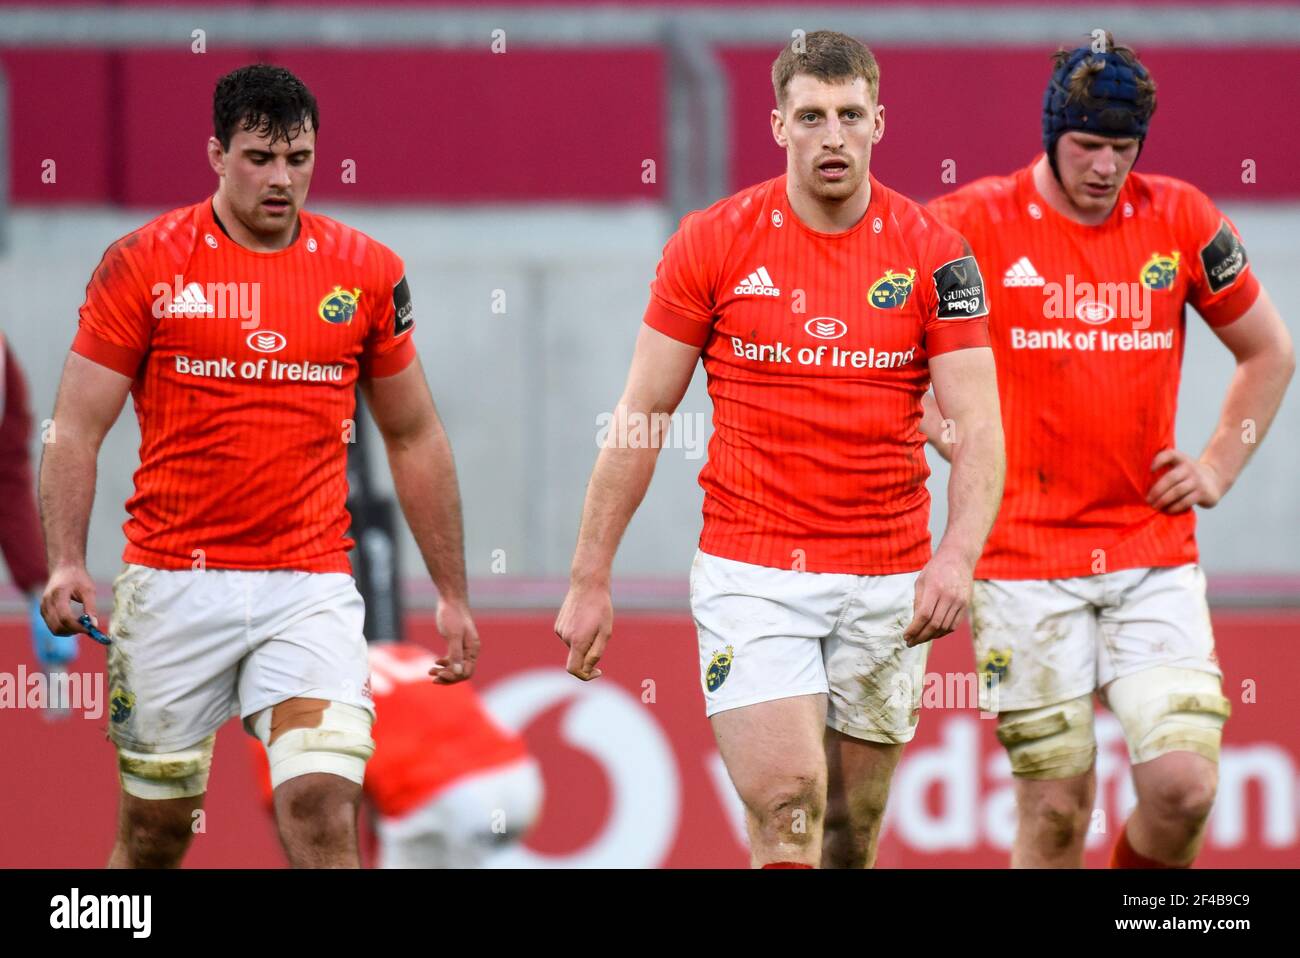 Limerick, Ireland. 19th Mar 2021. Liam Coombes of Munster during the  Guinness PRO14 Round 16 match between Munster Rugby and Benetton Rugby at  Thomond Park in Limerick, Ireland on March 19, 2021 (